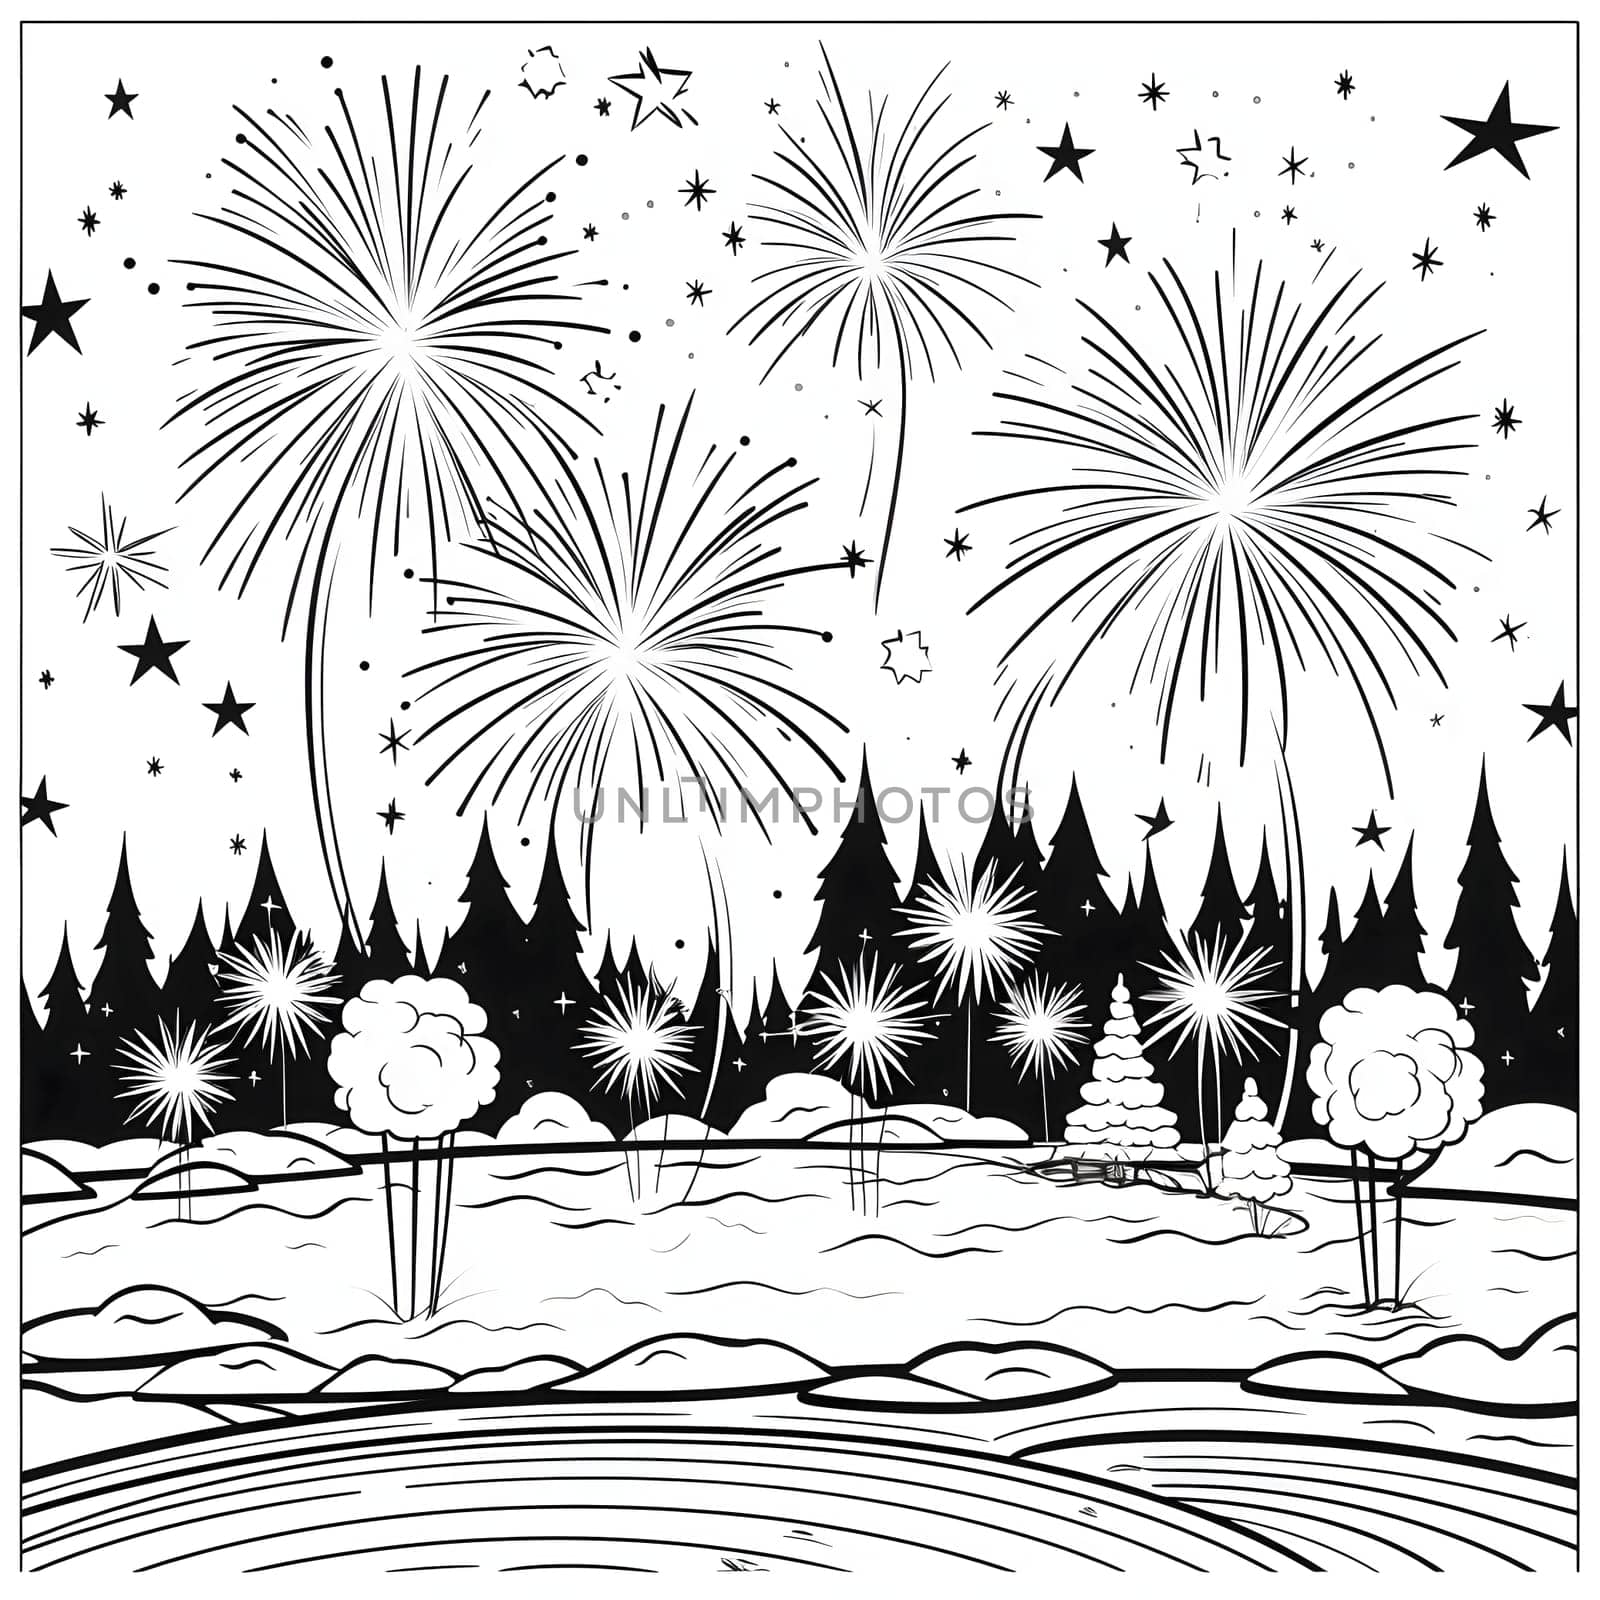 Fireworks show. Black and white coloring sheet. New Year's fun and festivities. by ThemesS